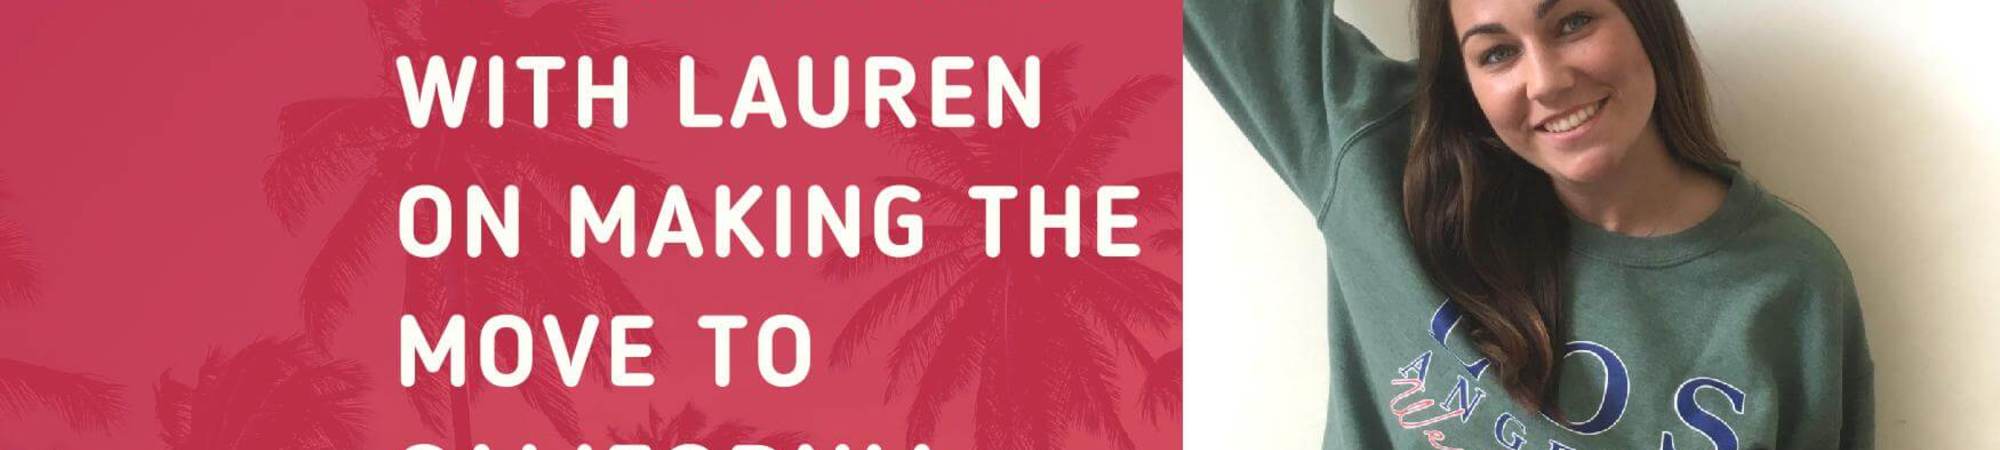 An Interview With Lauren On Making The Move To California